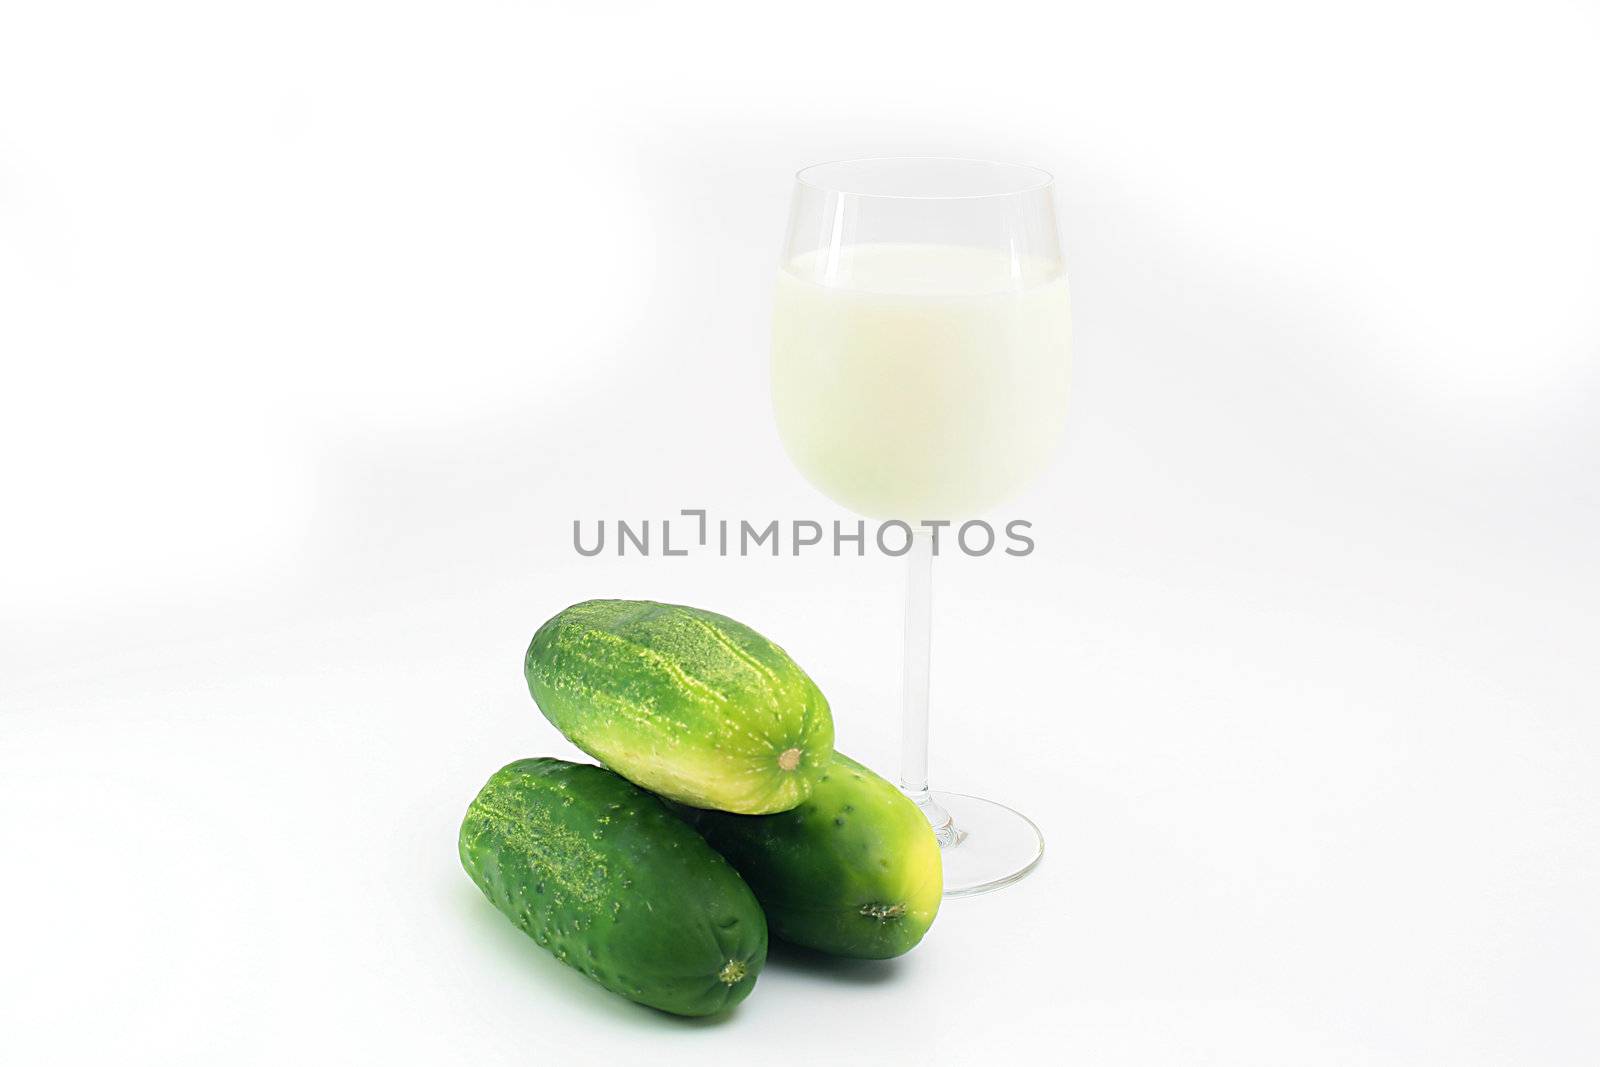 The combination of a crude cucumber and fresh milk leads to diarrhoeia. In a photo three cucumbers and a milk glass.